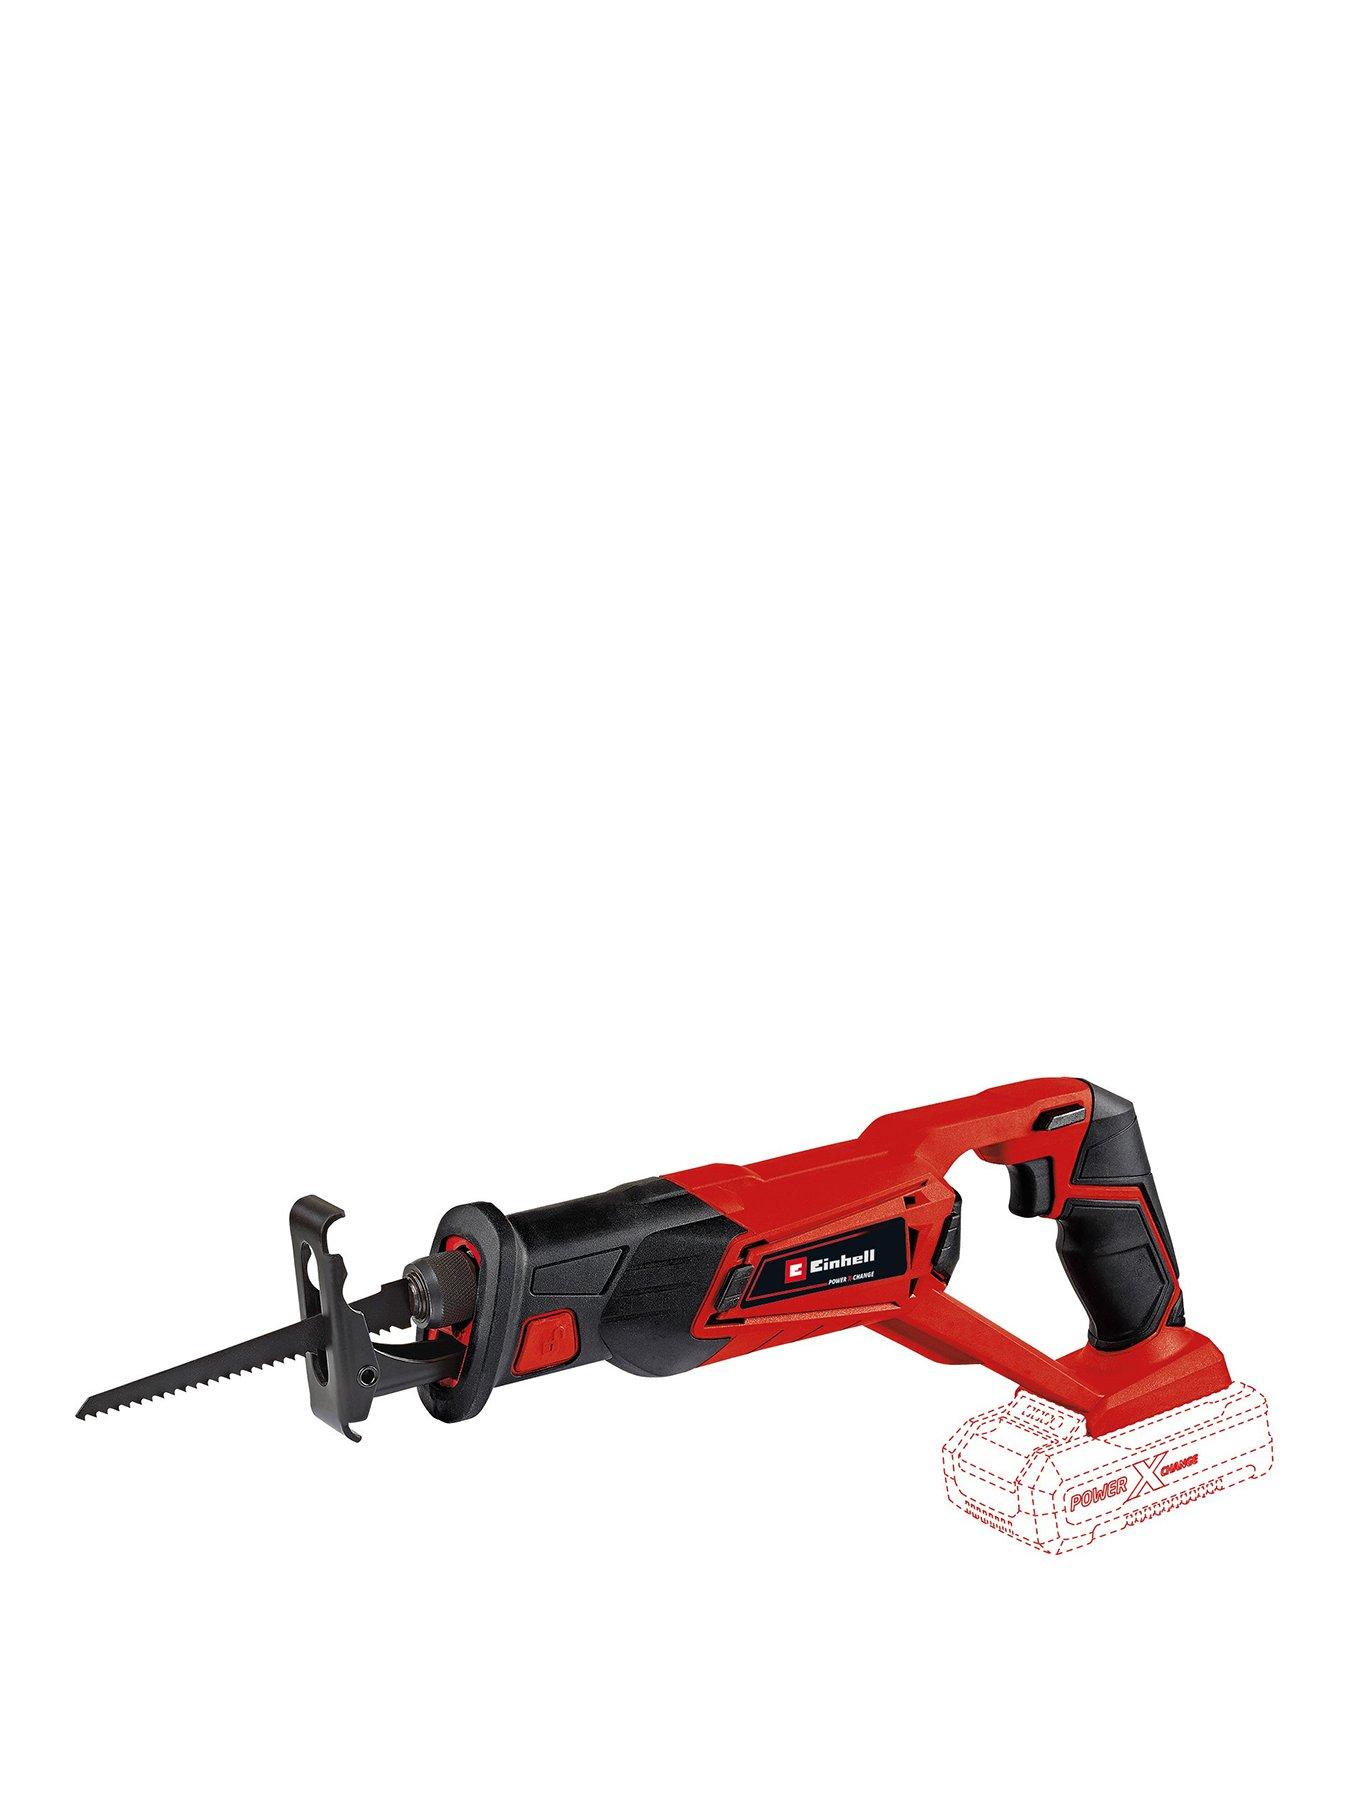 Einhell 18V PXC Cordless Universal Saw / Reciprocating Saw - Why